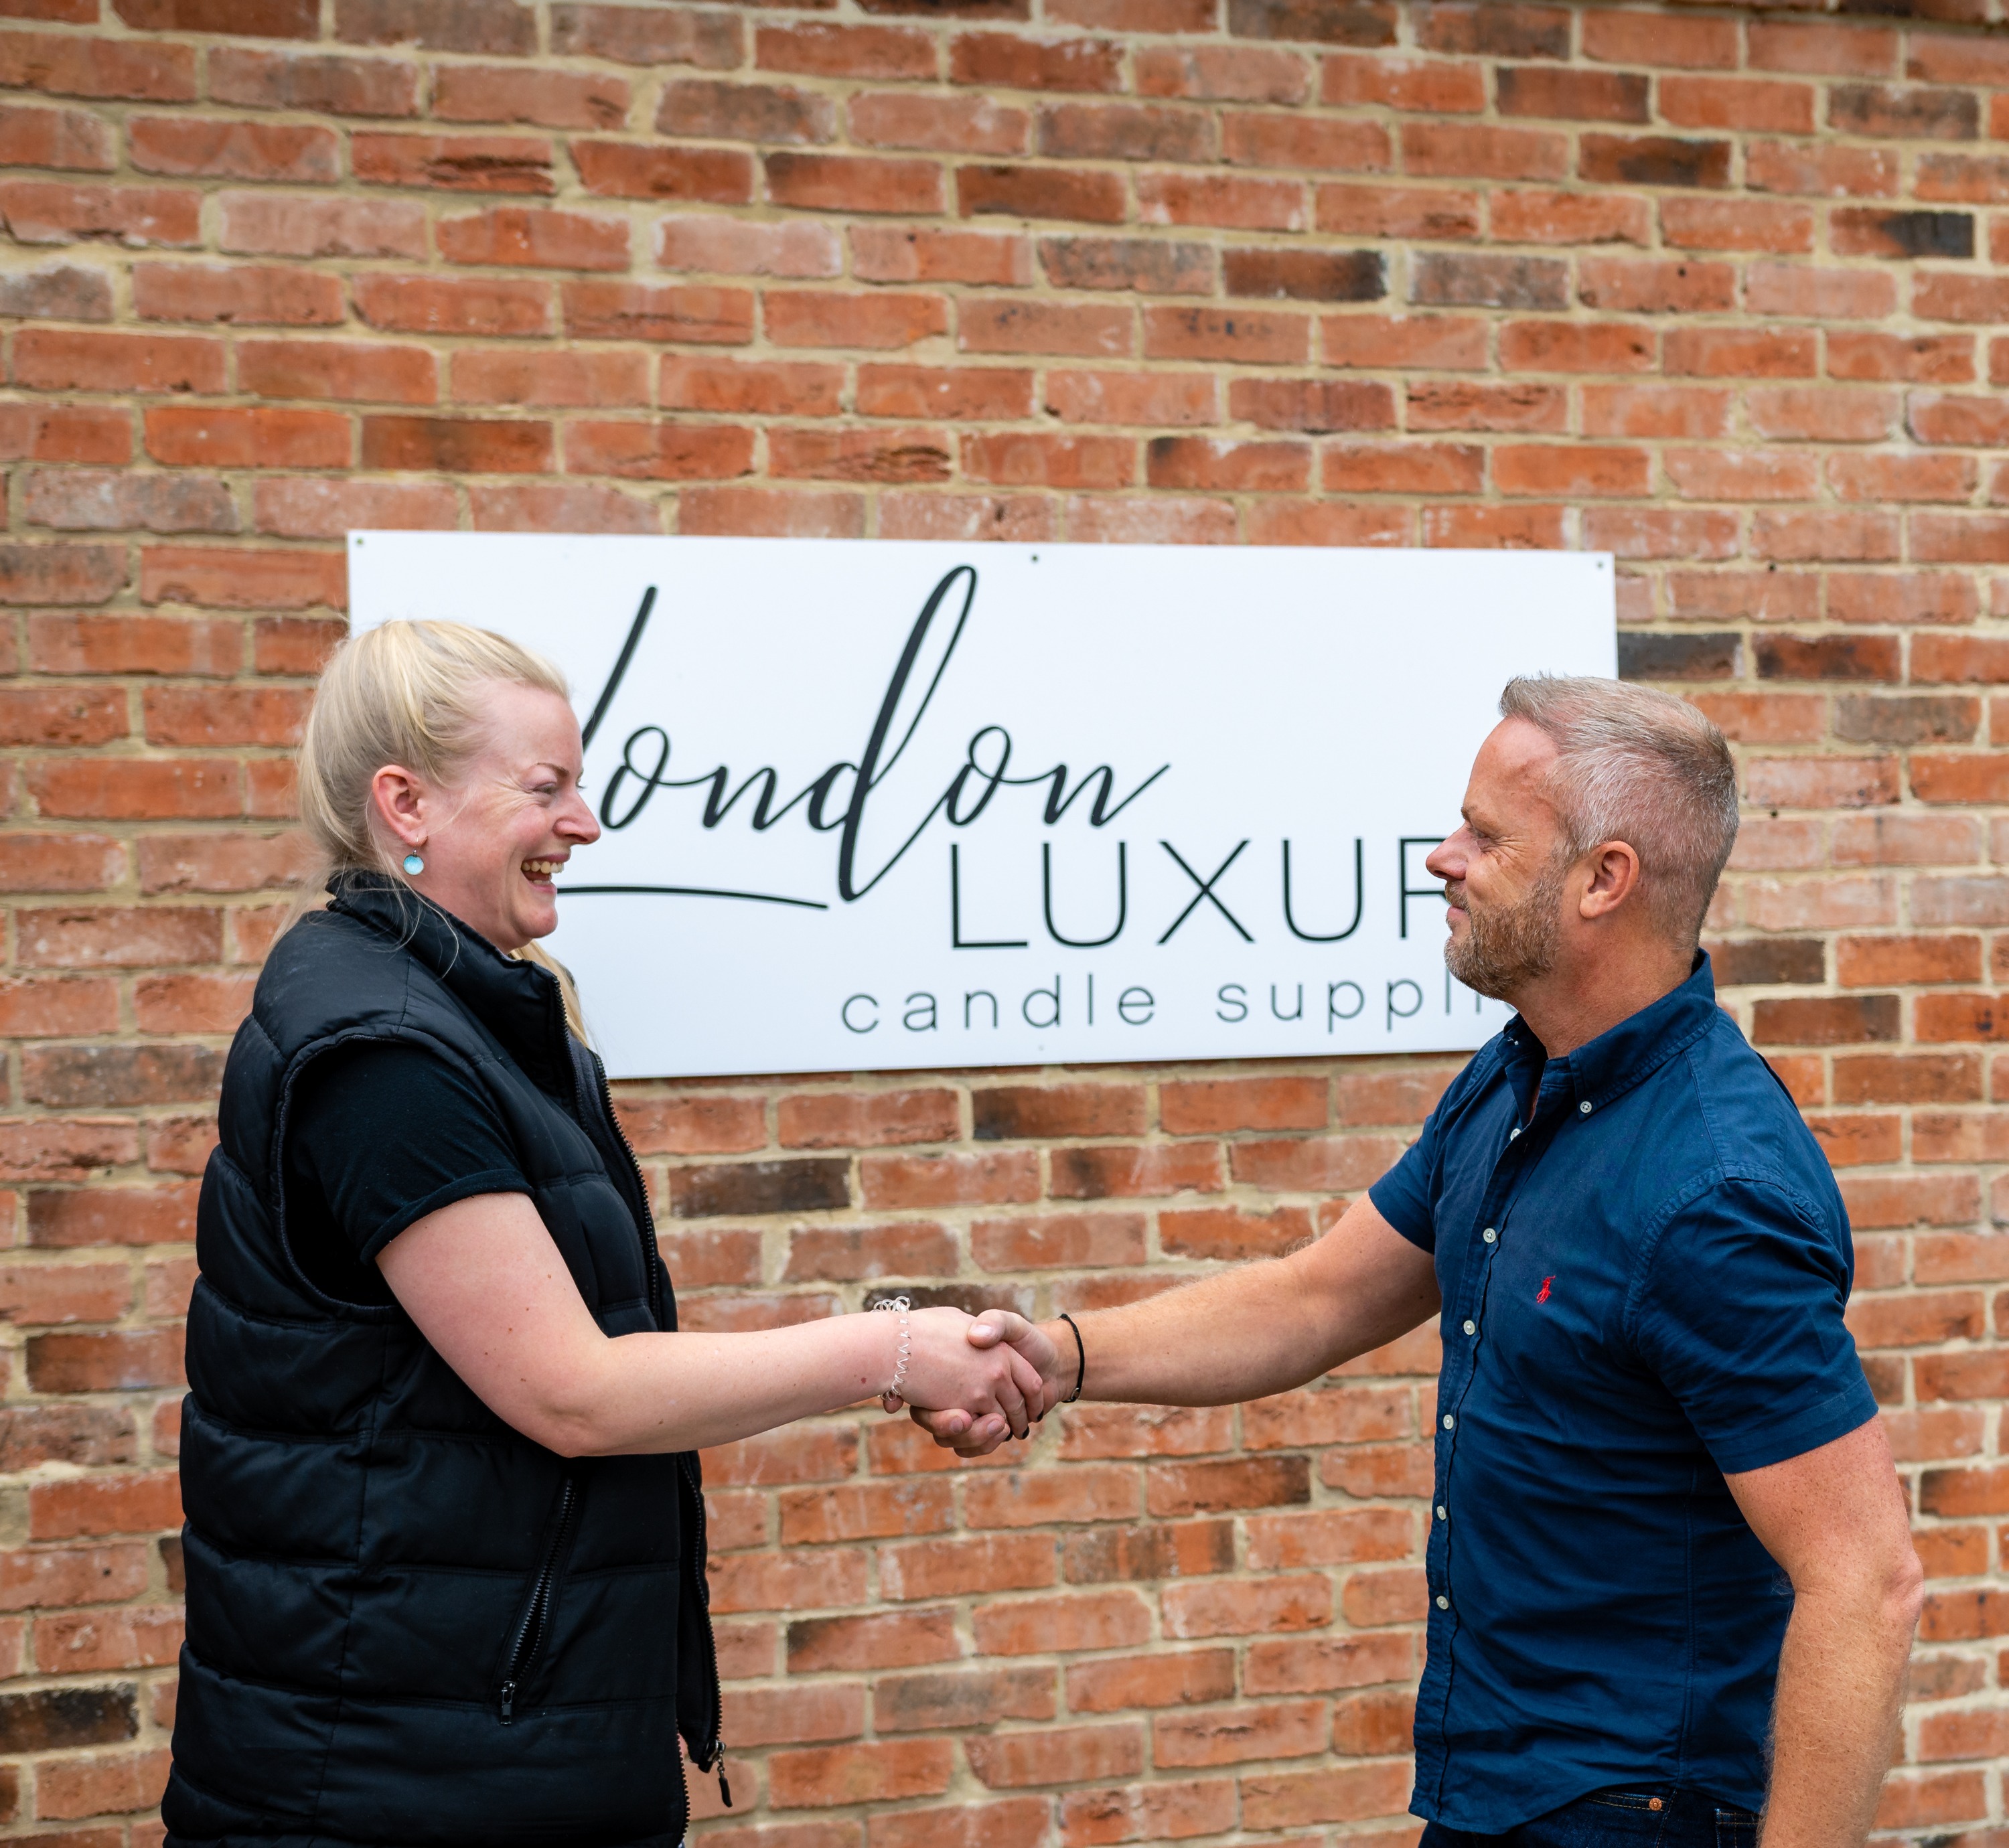 Victoria, from London Luxury Candle Supplies, shaking hands with a customer.